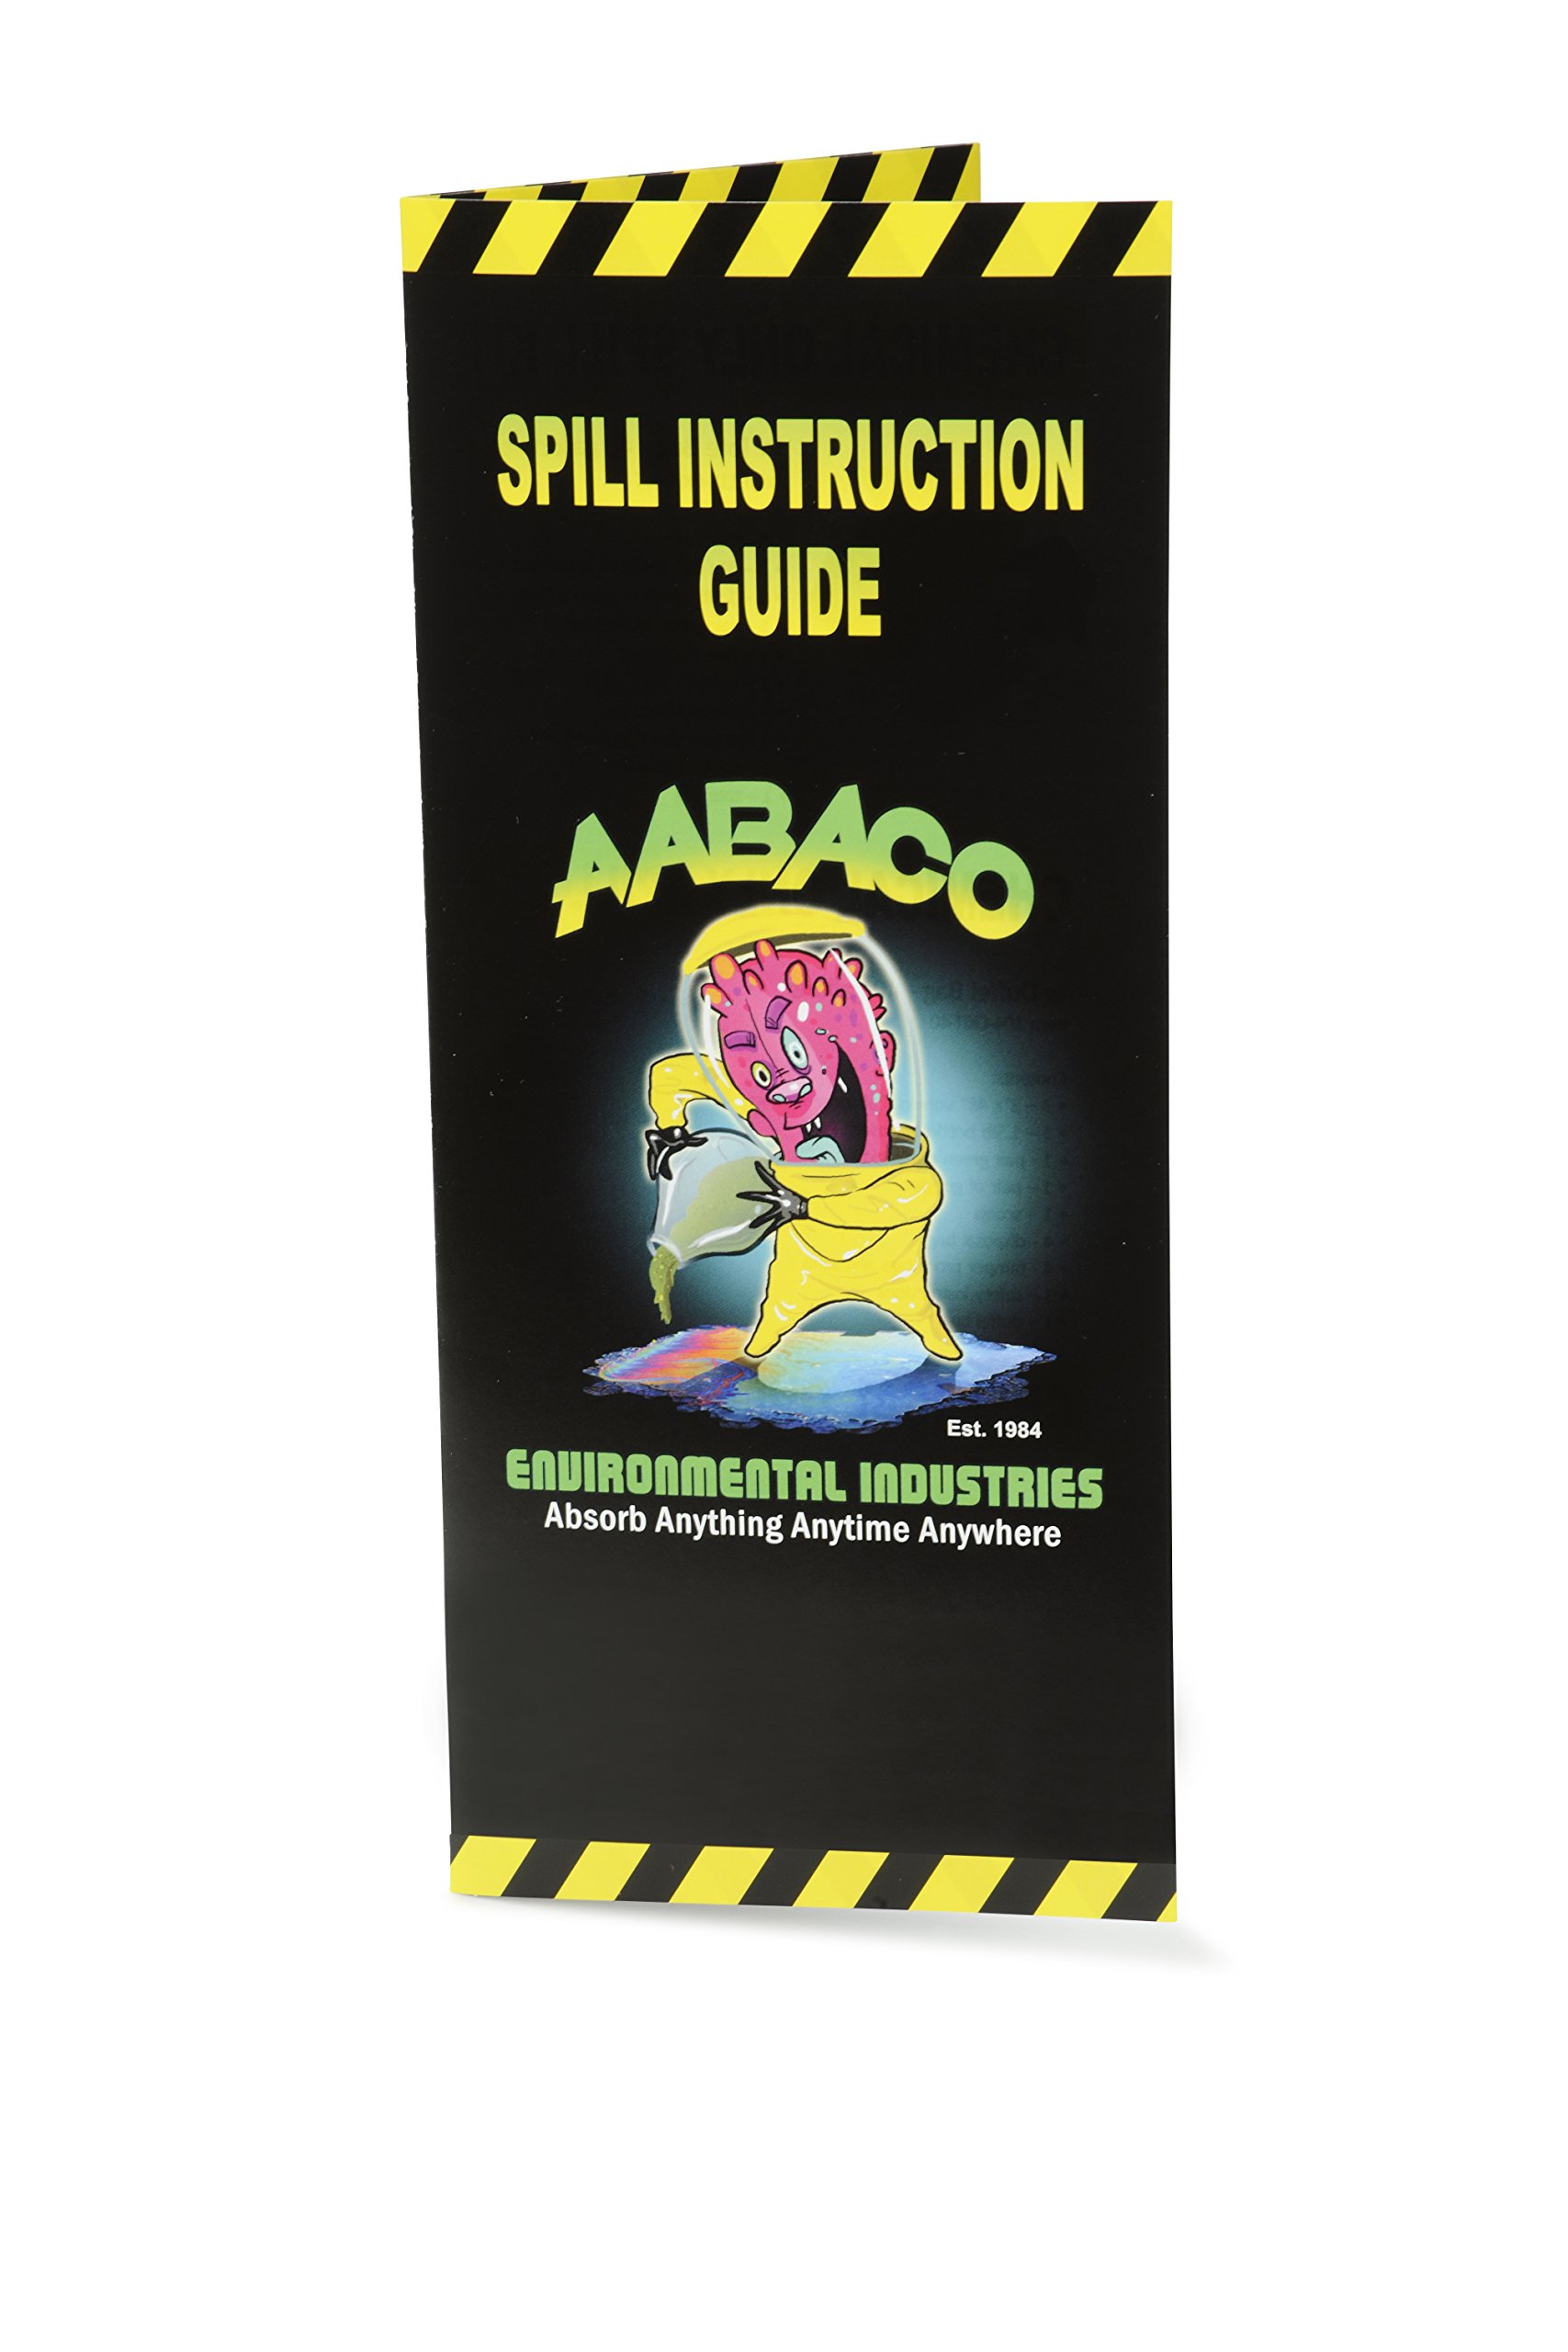 AABACO Universal Spill KIT – Perfect Spill Kits for Trucks - in Portable High Visibility Yellow Tote Bag –for Spill Response – Chemical Or Oil Containment -1 Kit